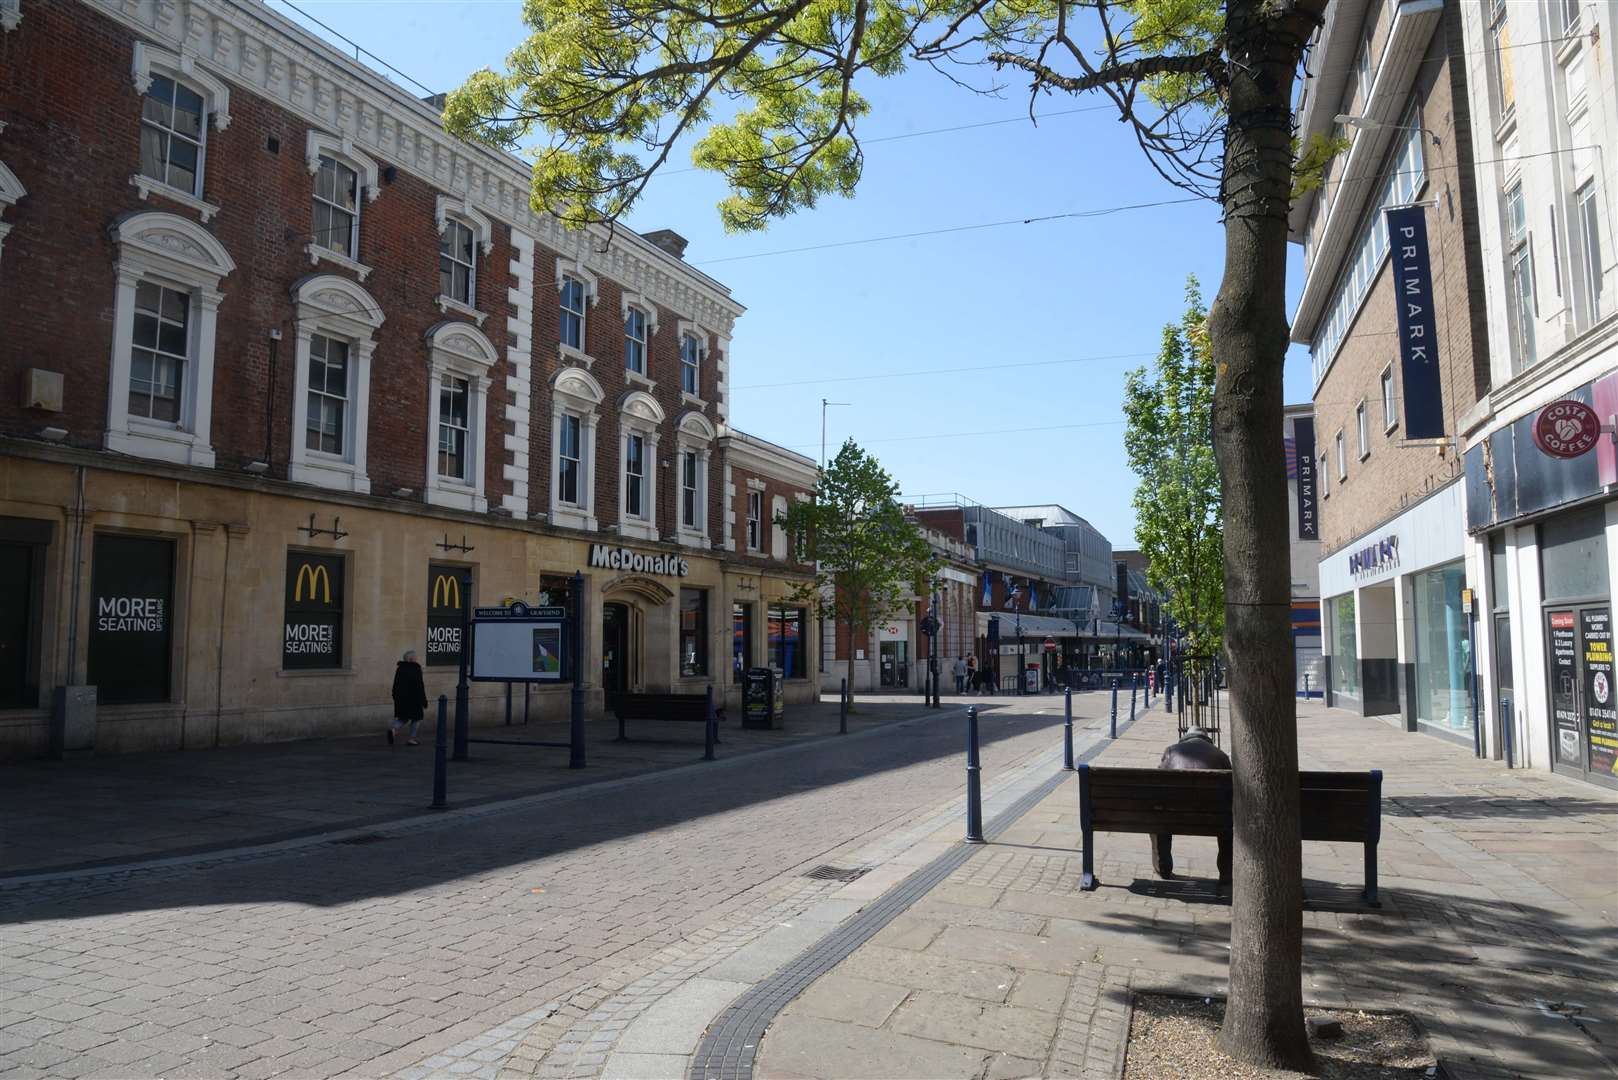 Head teachers say children should avoid Gravesend town centre before and after school